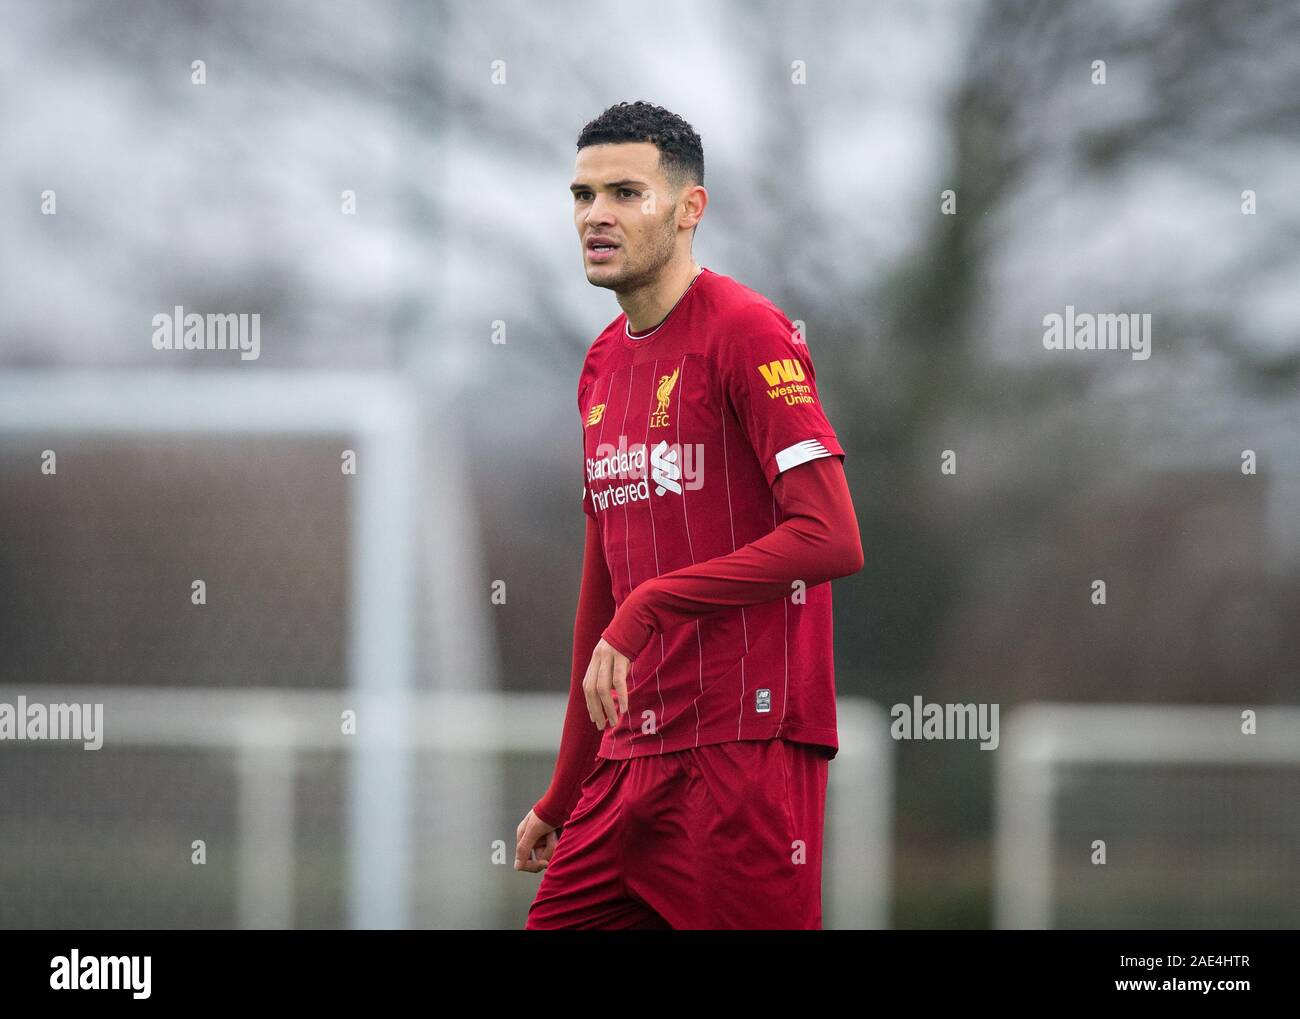 Hotspur Way, UK. 06th Dec, 2019. Isaac Christie-Davies of Liverpool during the Premier League 2 match between Tottenham Hotspur U23 and Liverpool U23 at Tottenham Hotspur Training Ground, Hotspur Way, England on 6 December 2019. Photo by Andy Rowland. Credit: PRiME Media Images/Alamy Live News Stock Photo